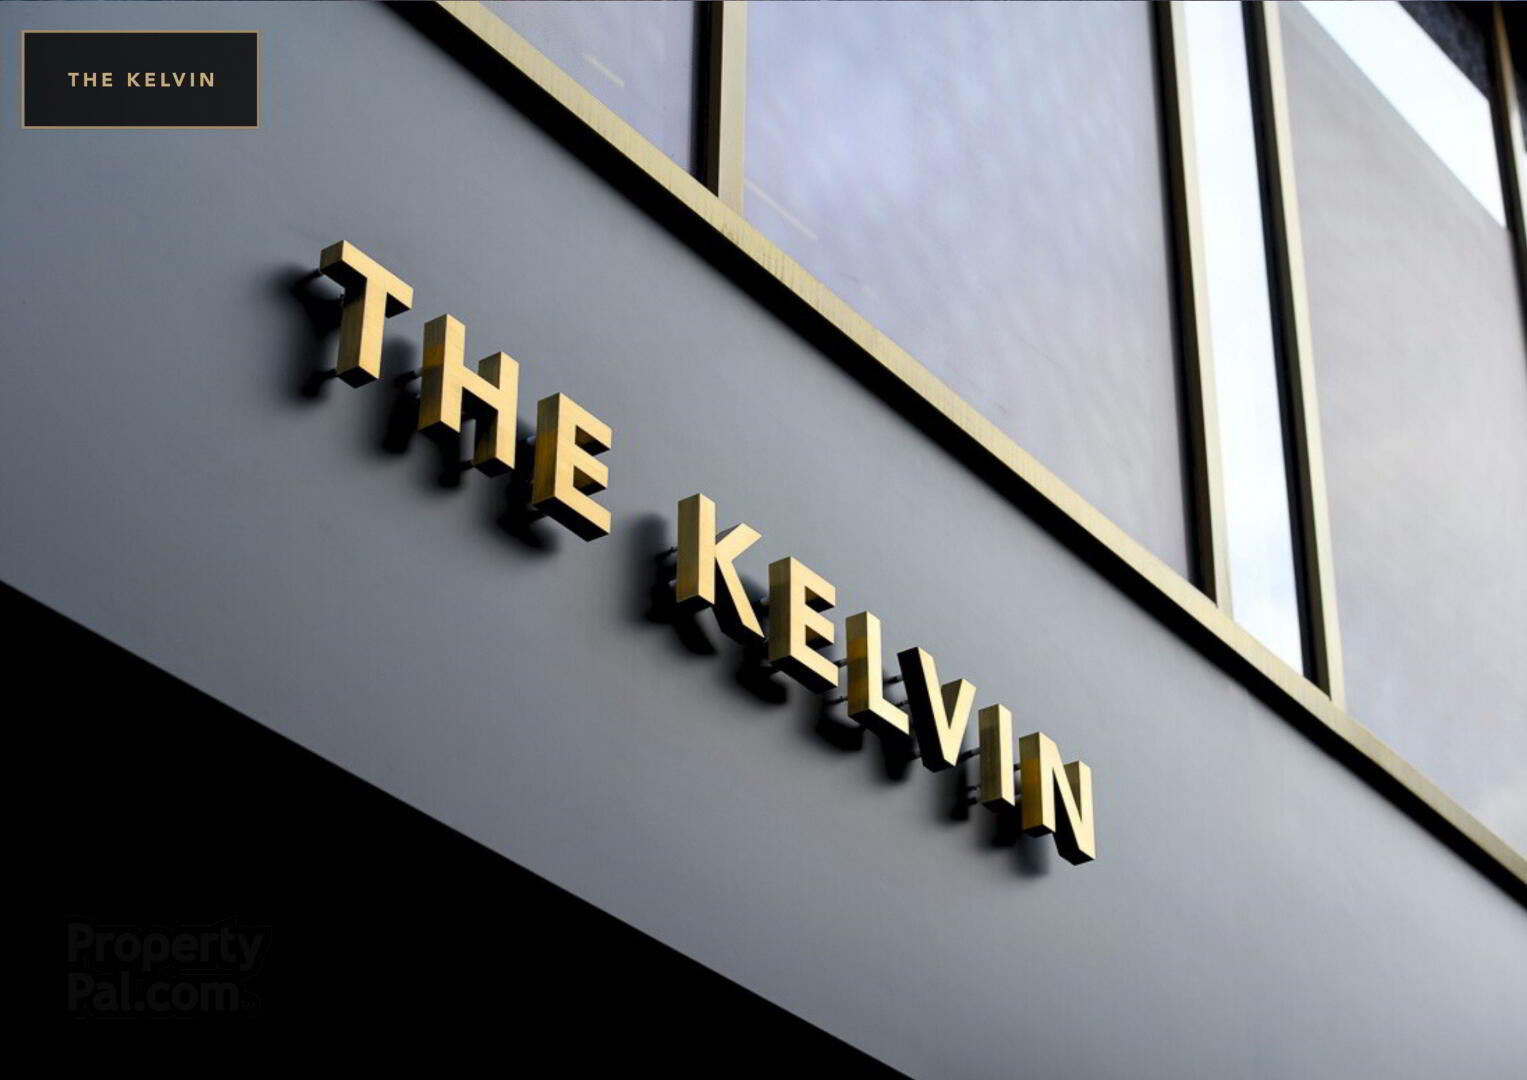 The Kelvin, 17-25 College Square East